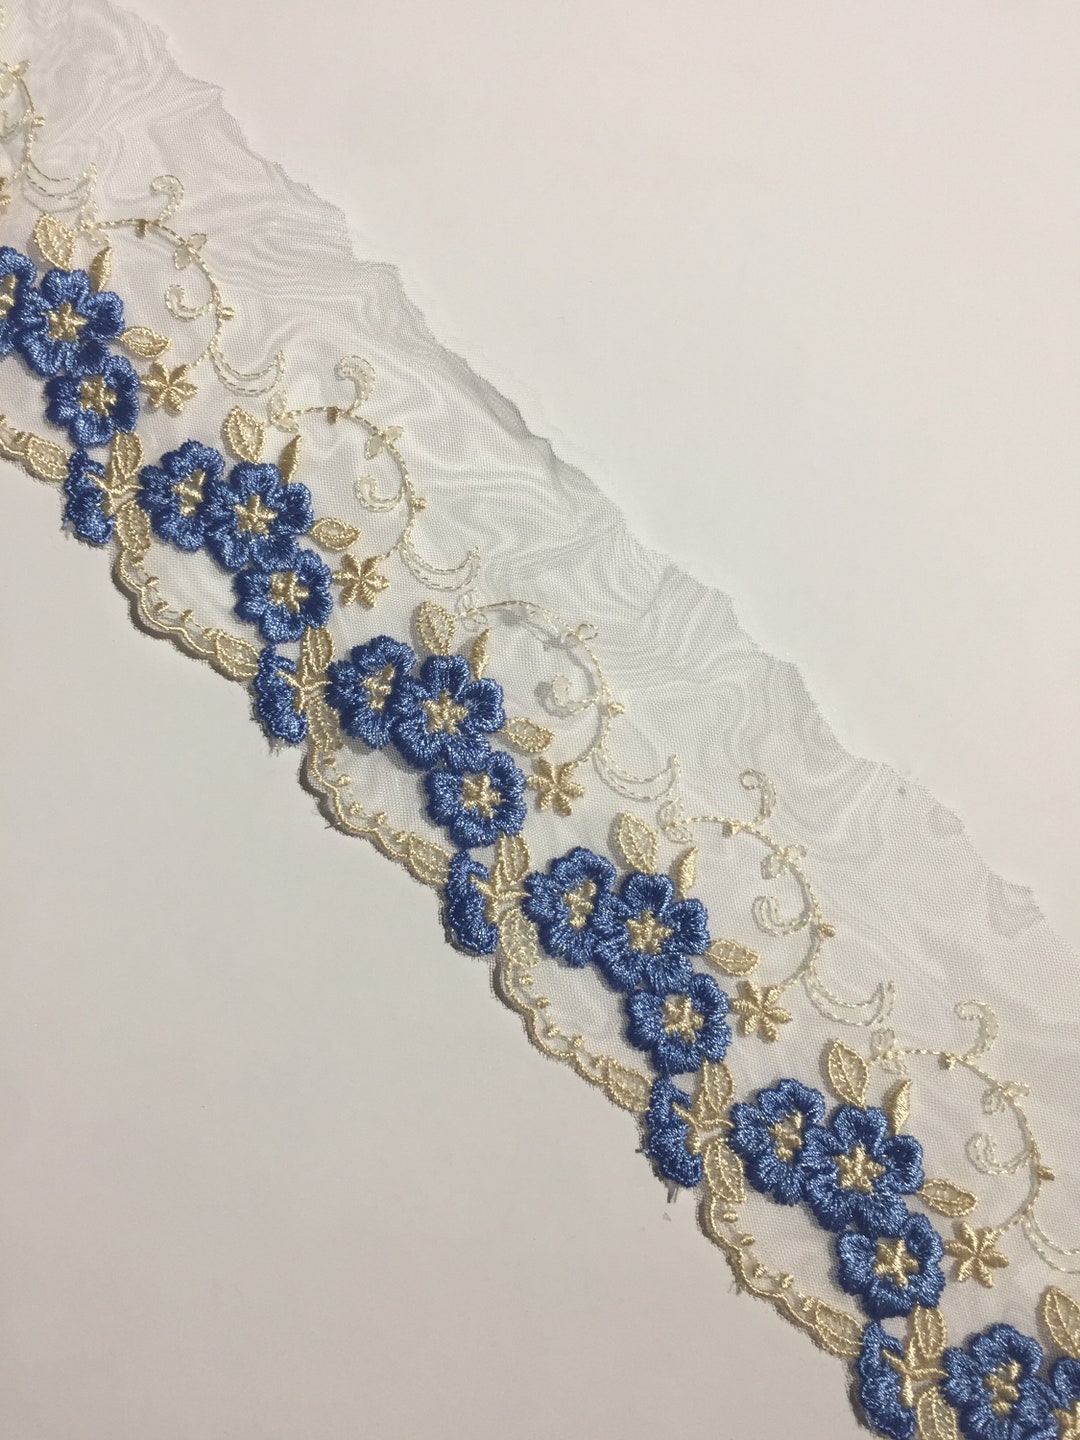 BACK Heavily Embroidered Pretty Blue Flower Netted Trim, Sewing ...